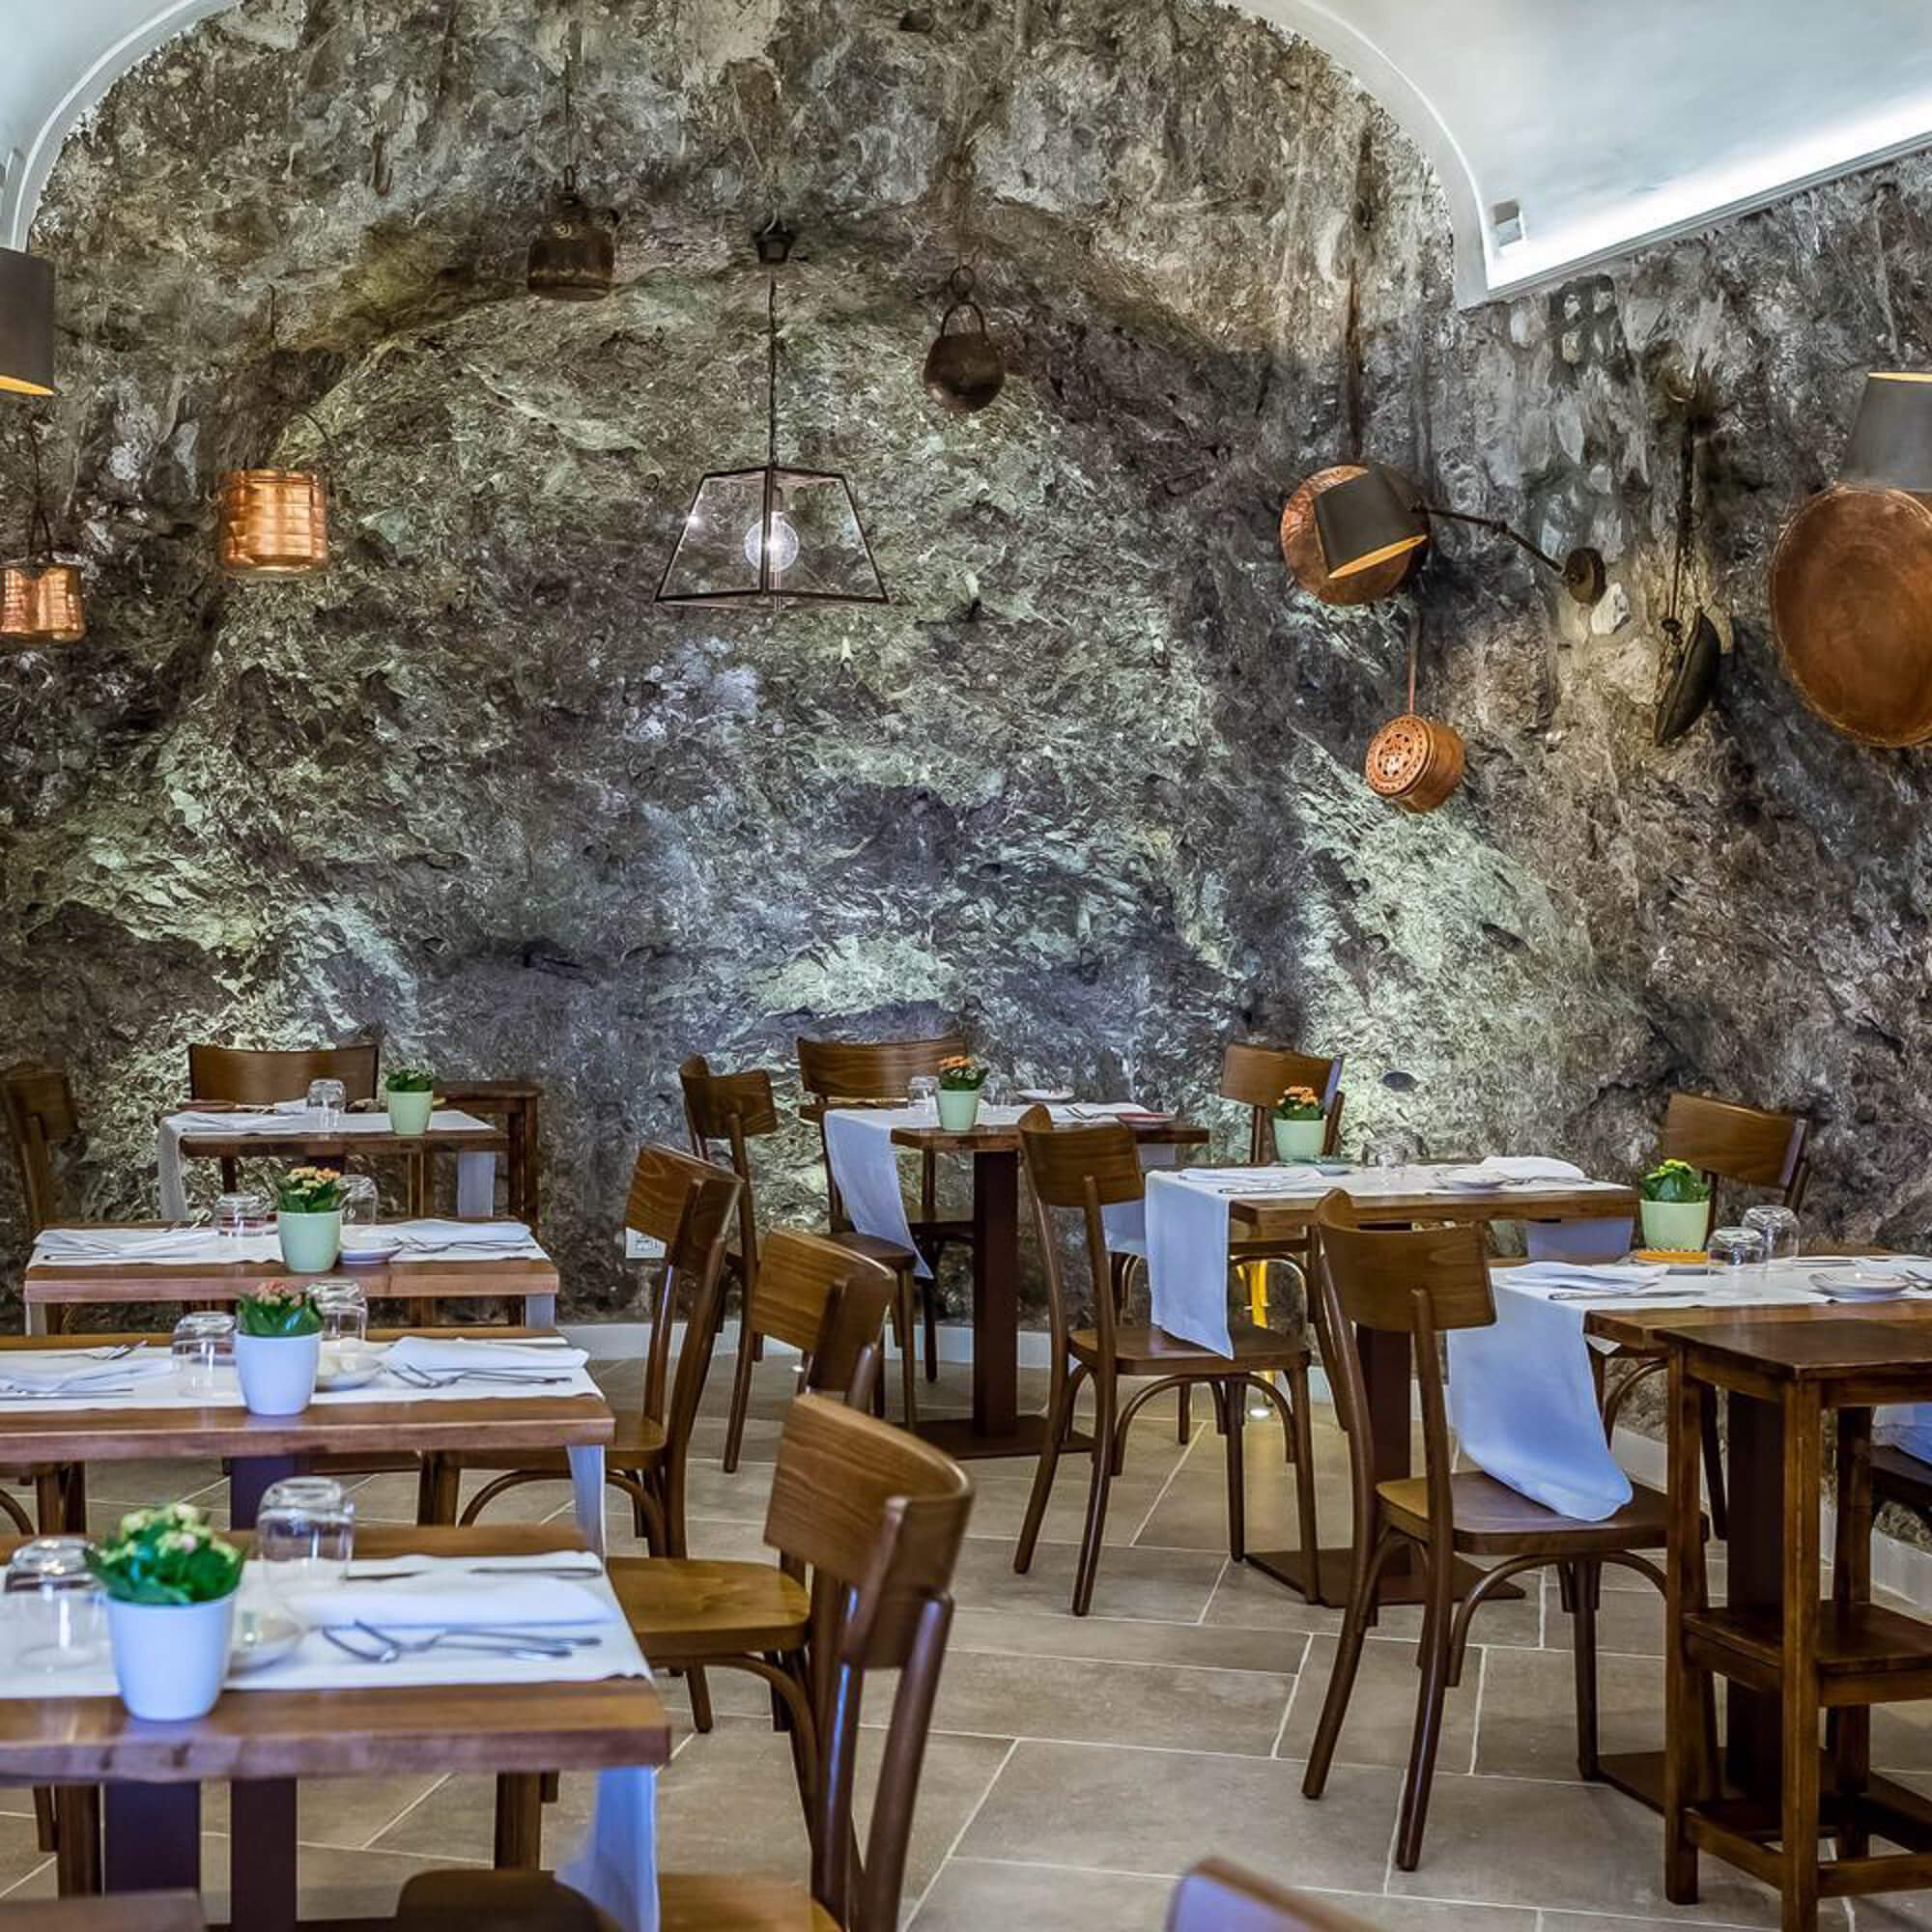 Da Vincenzo was literally built into the cliffside in Positano, so some of the interior includes exposed stone. It is quite beautiful and one of the top restaurants in Positano.